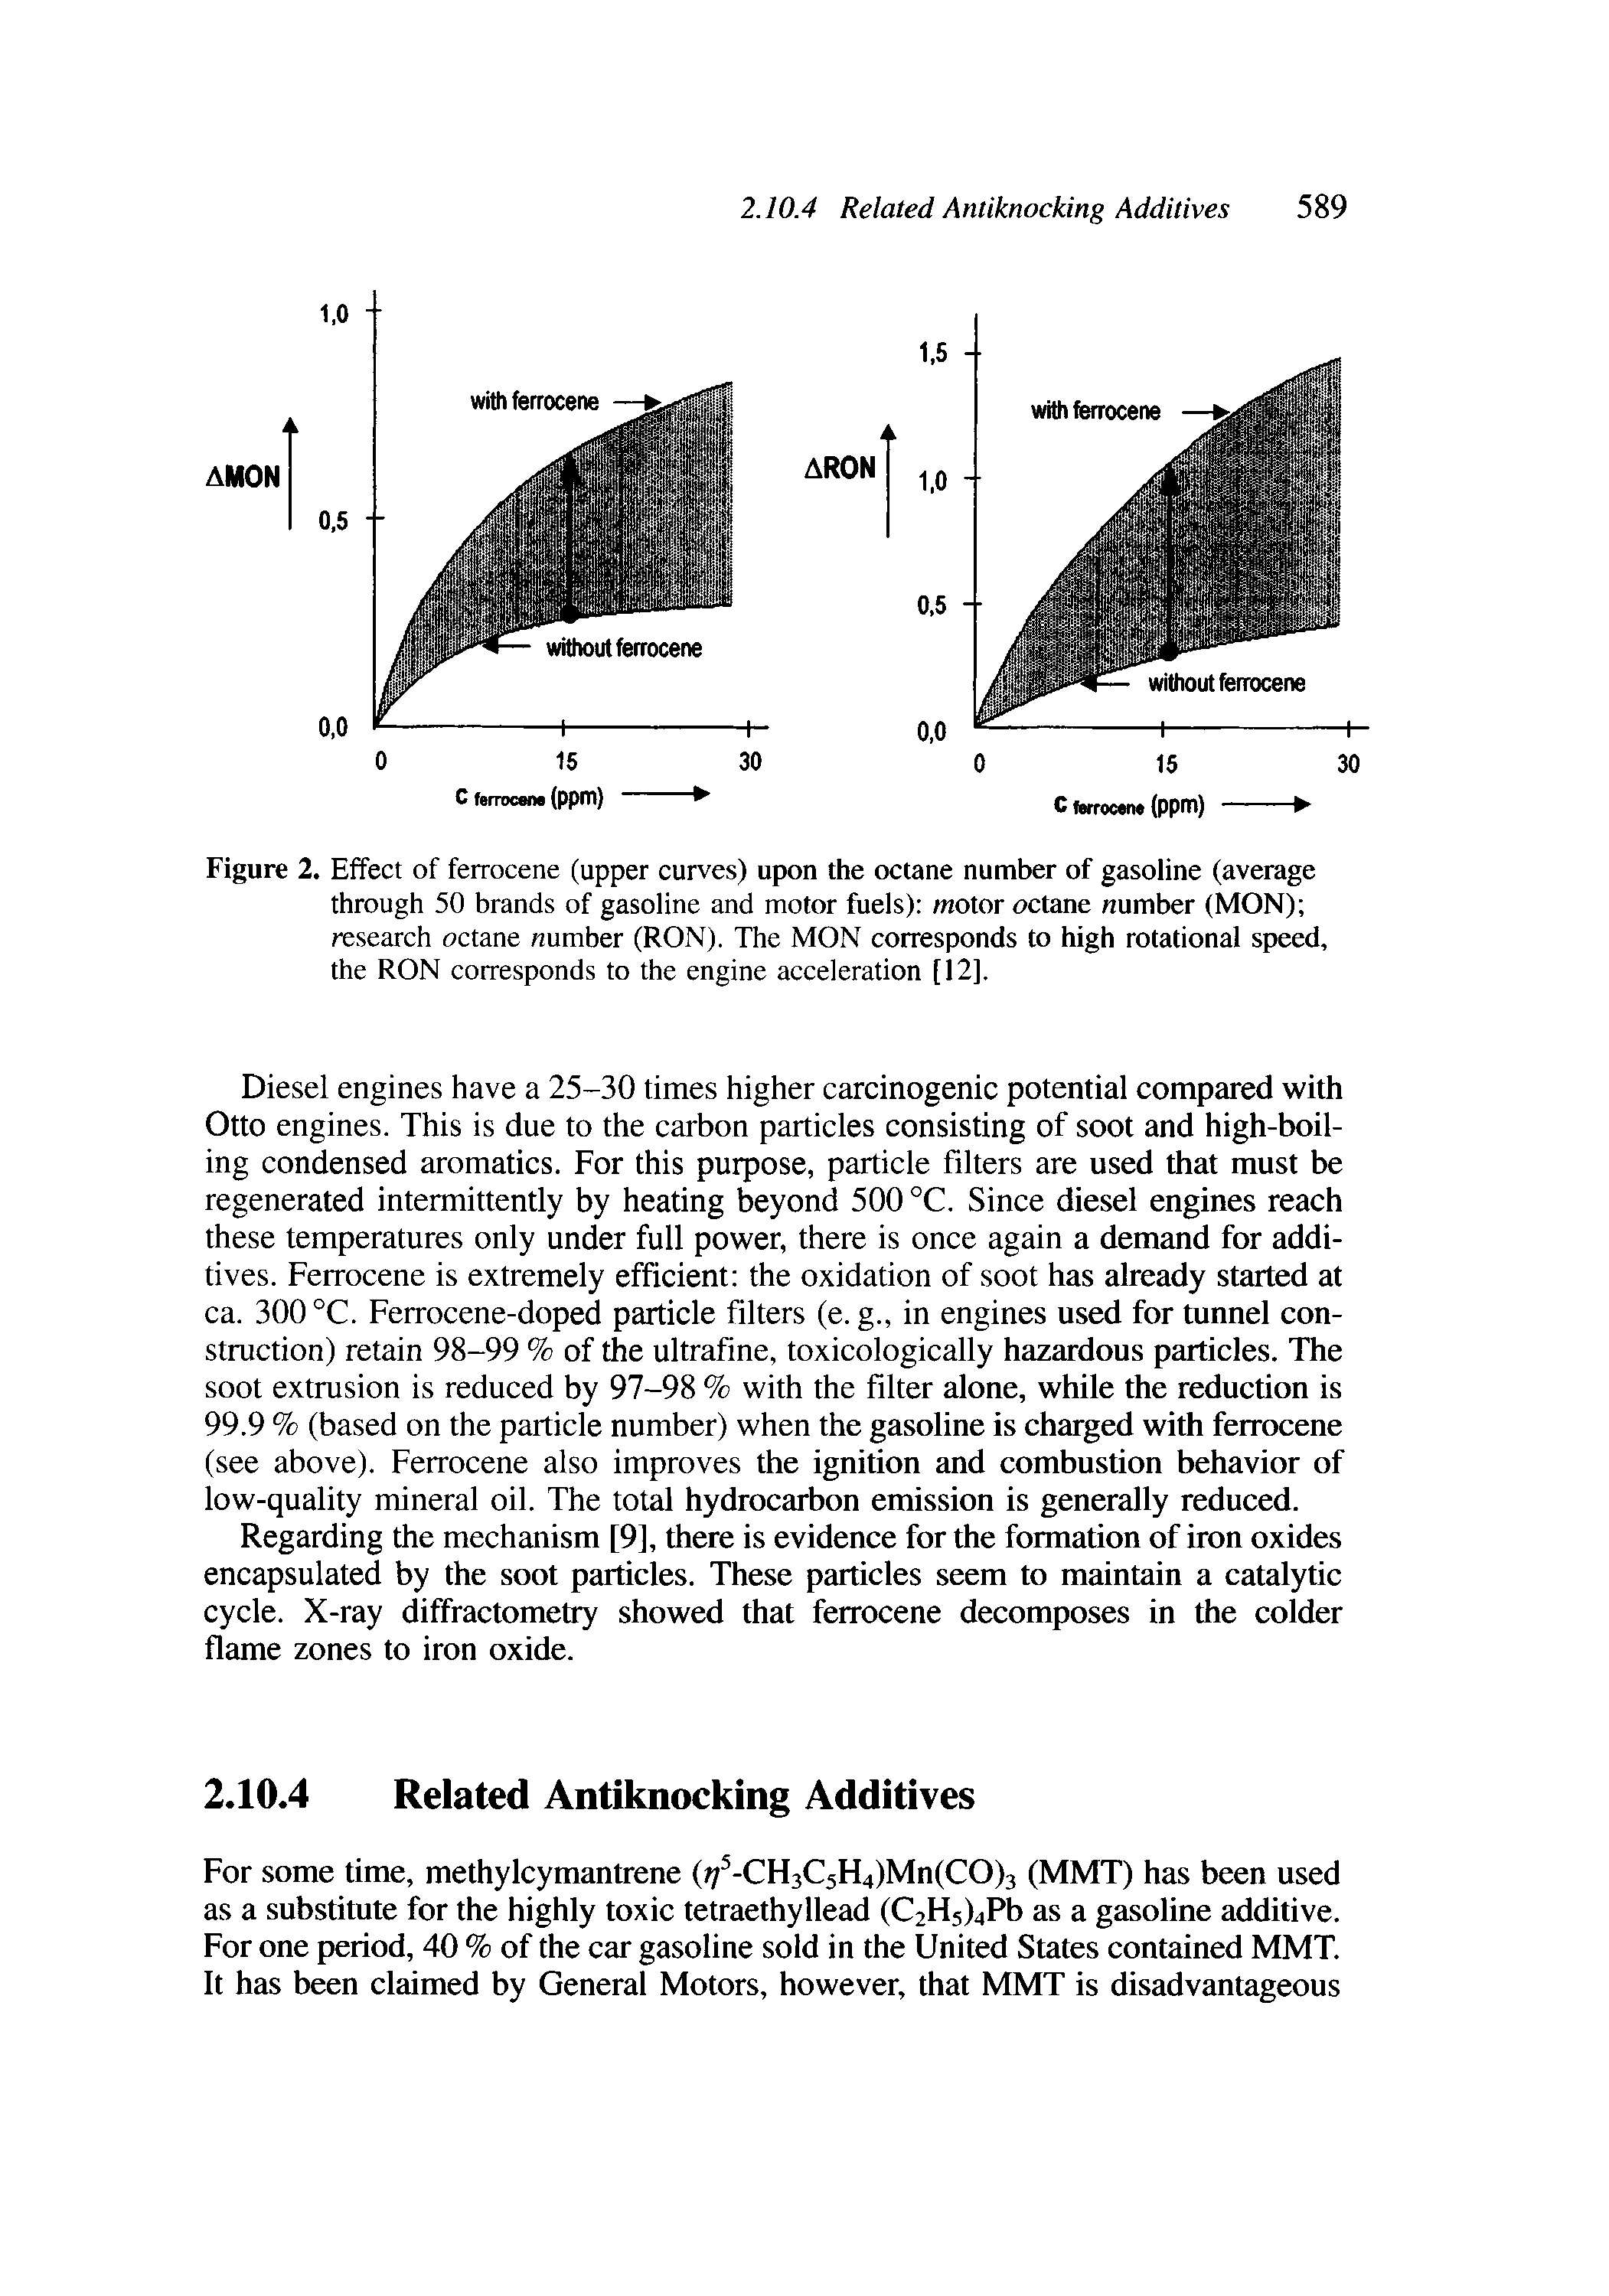 Figure 2. Effect of ferrocene (upper curves) upon the octane number of gasoline (average through 50 brands of gasoline and motor fuels) motor octane number (MON) research octane number (RON). The MON corresponds to high rotational speed, the RON corresponds to the engine acceleration [12].